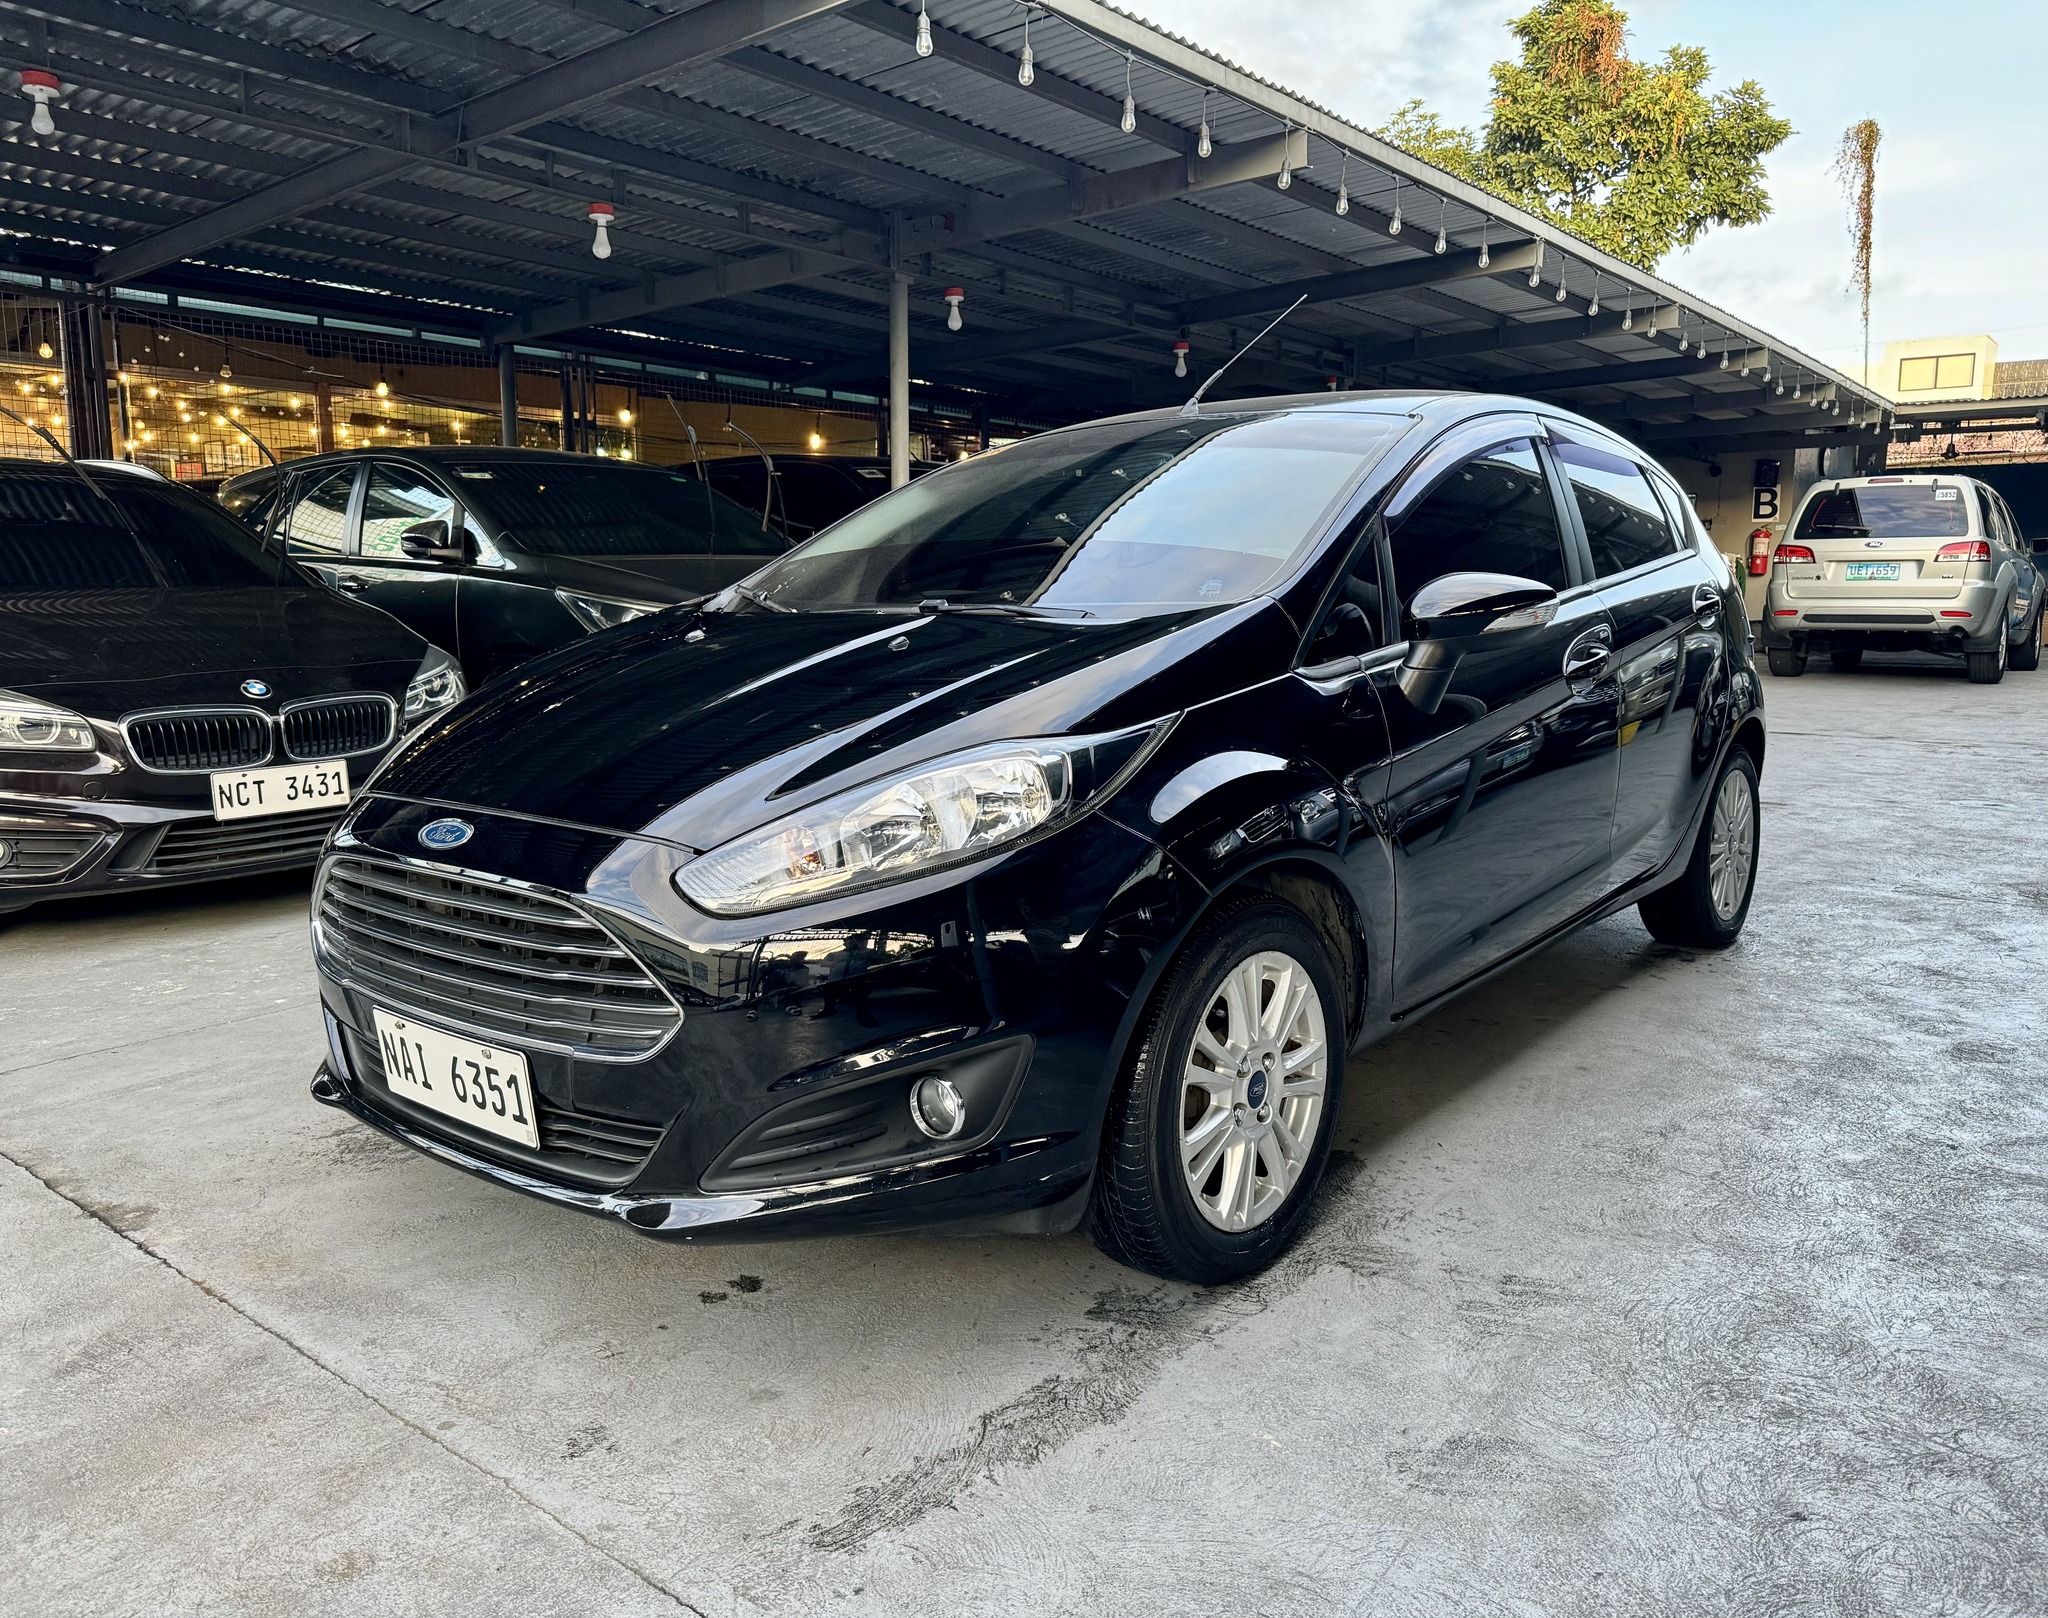 2018 Ford Fiesta Automatic Hatchback 51,000 Kms Only Orig!